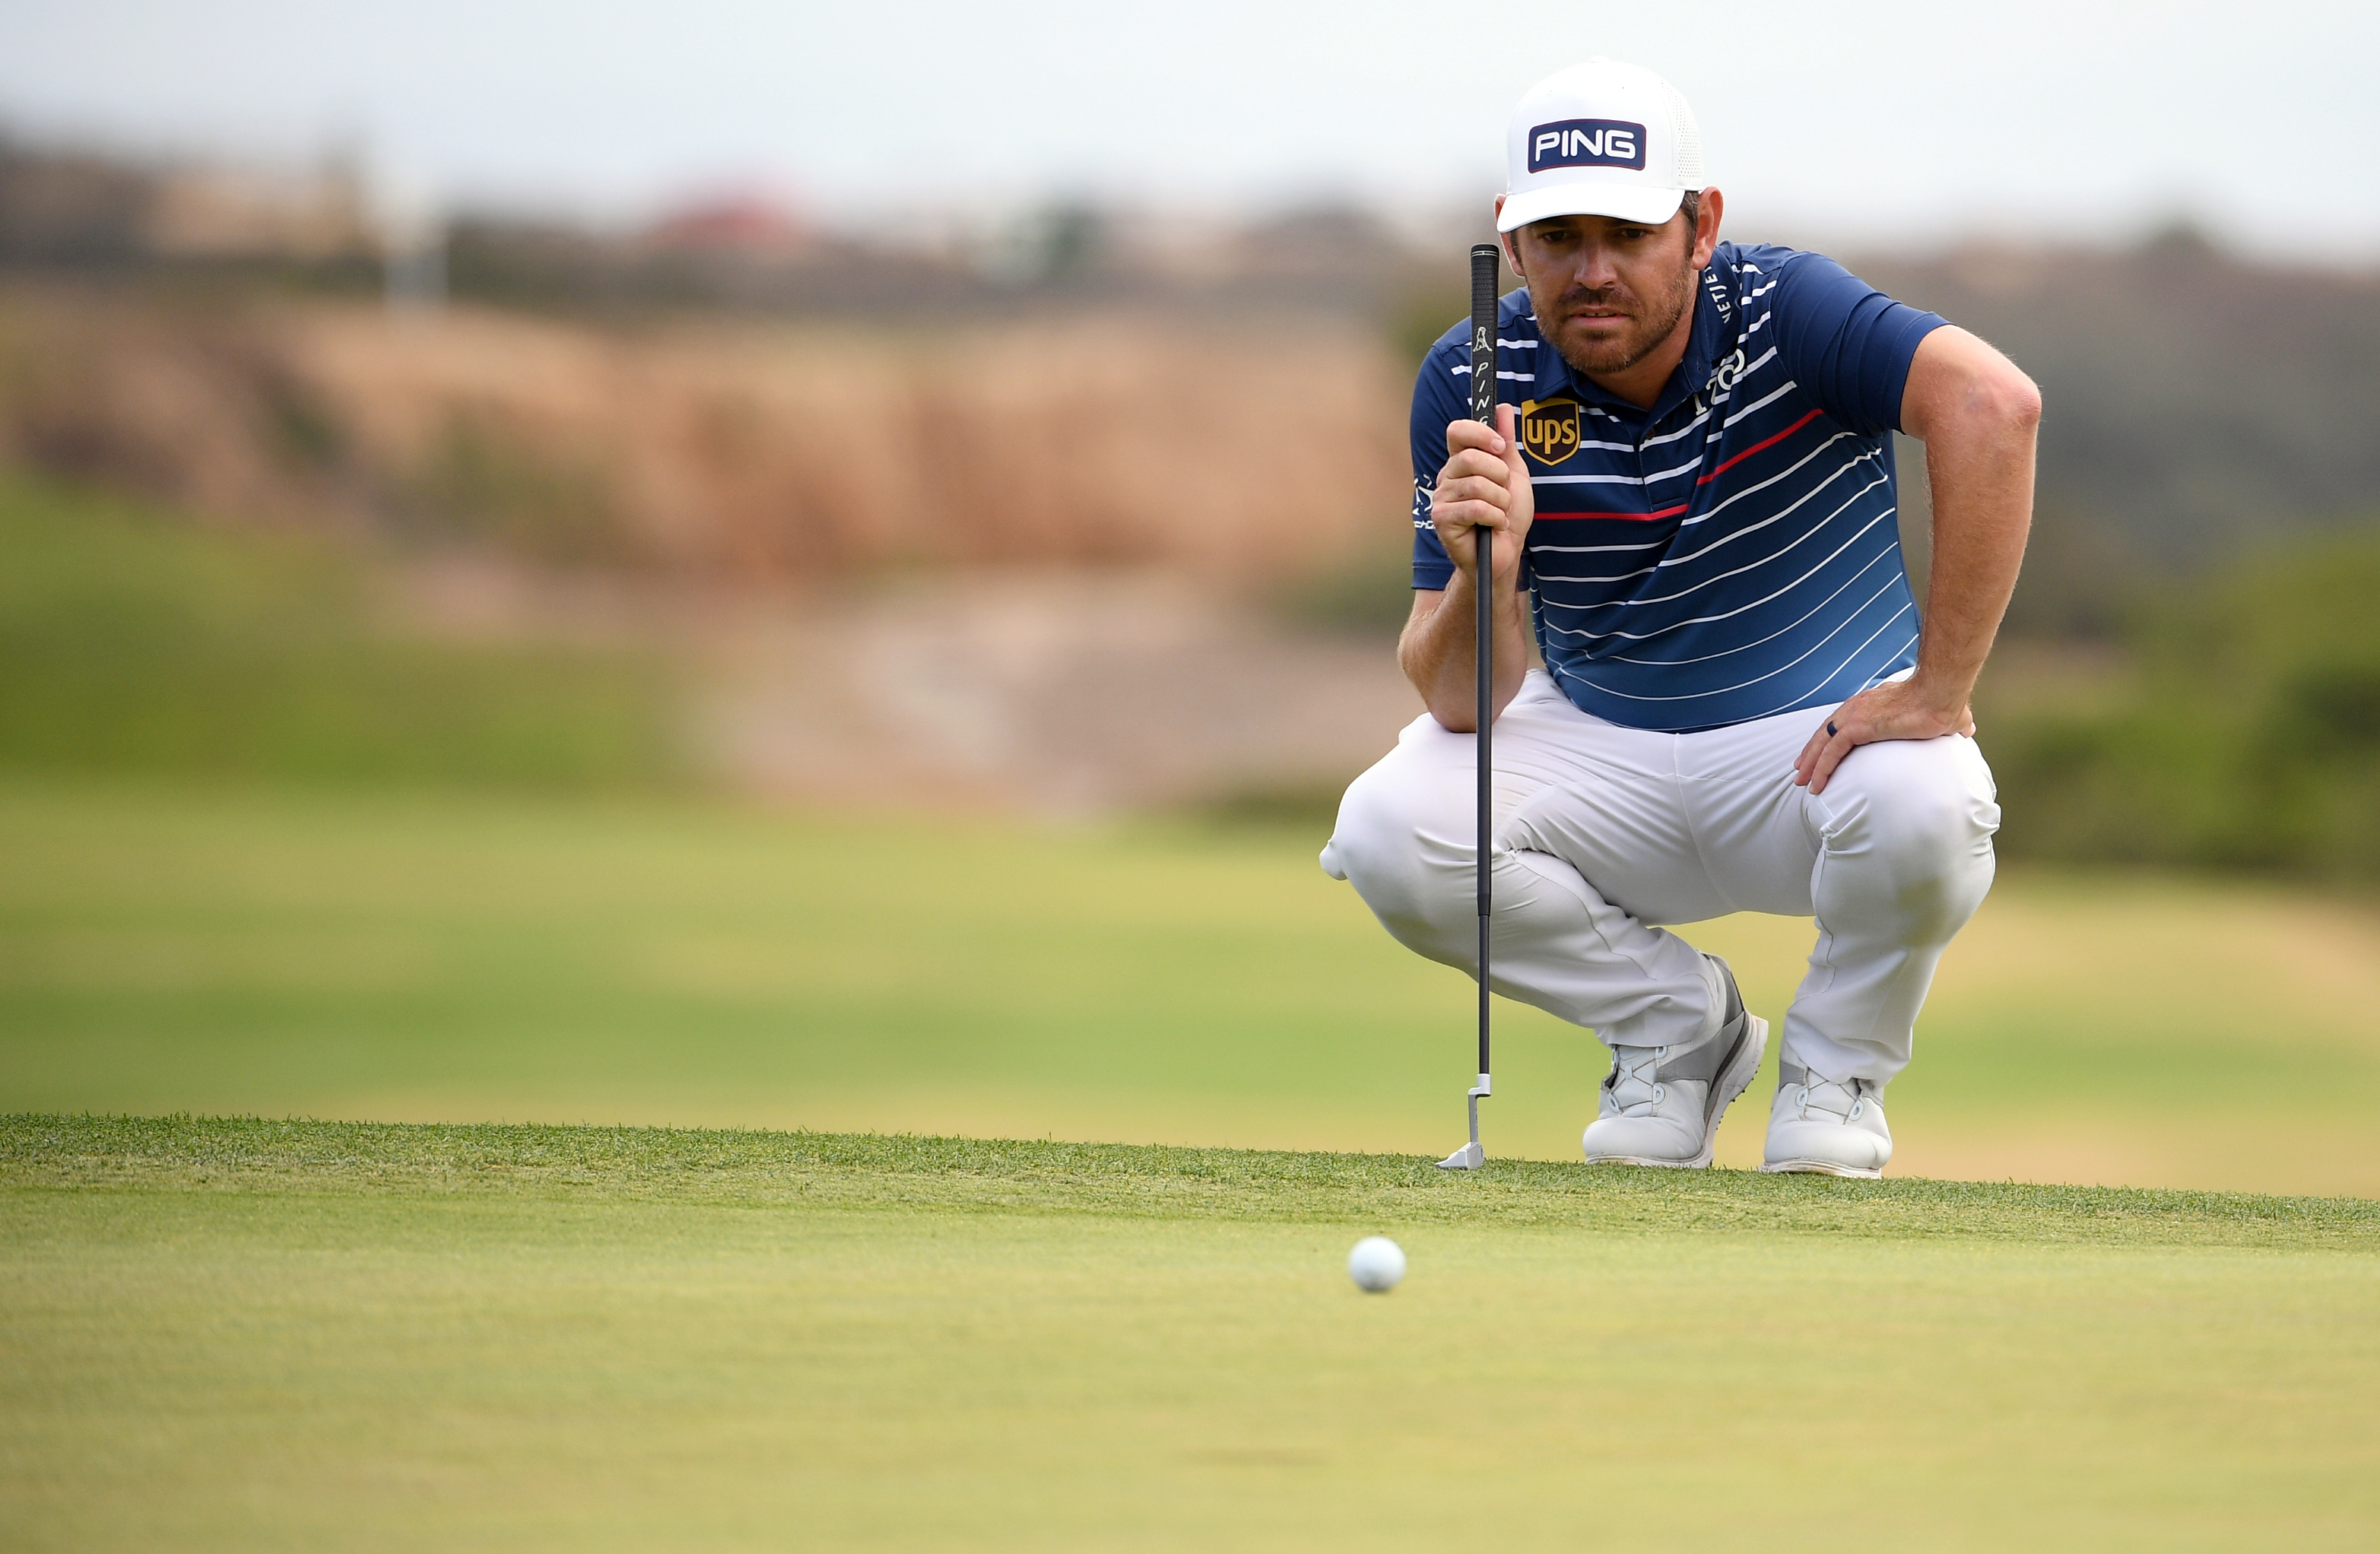 Louis Oosthuizen's GOLF Cover Shoot